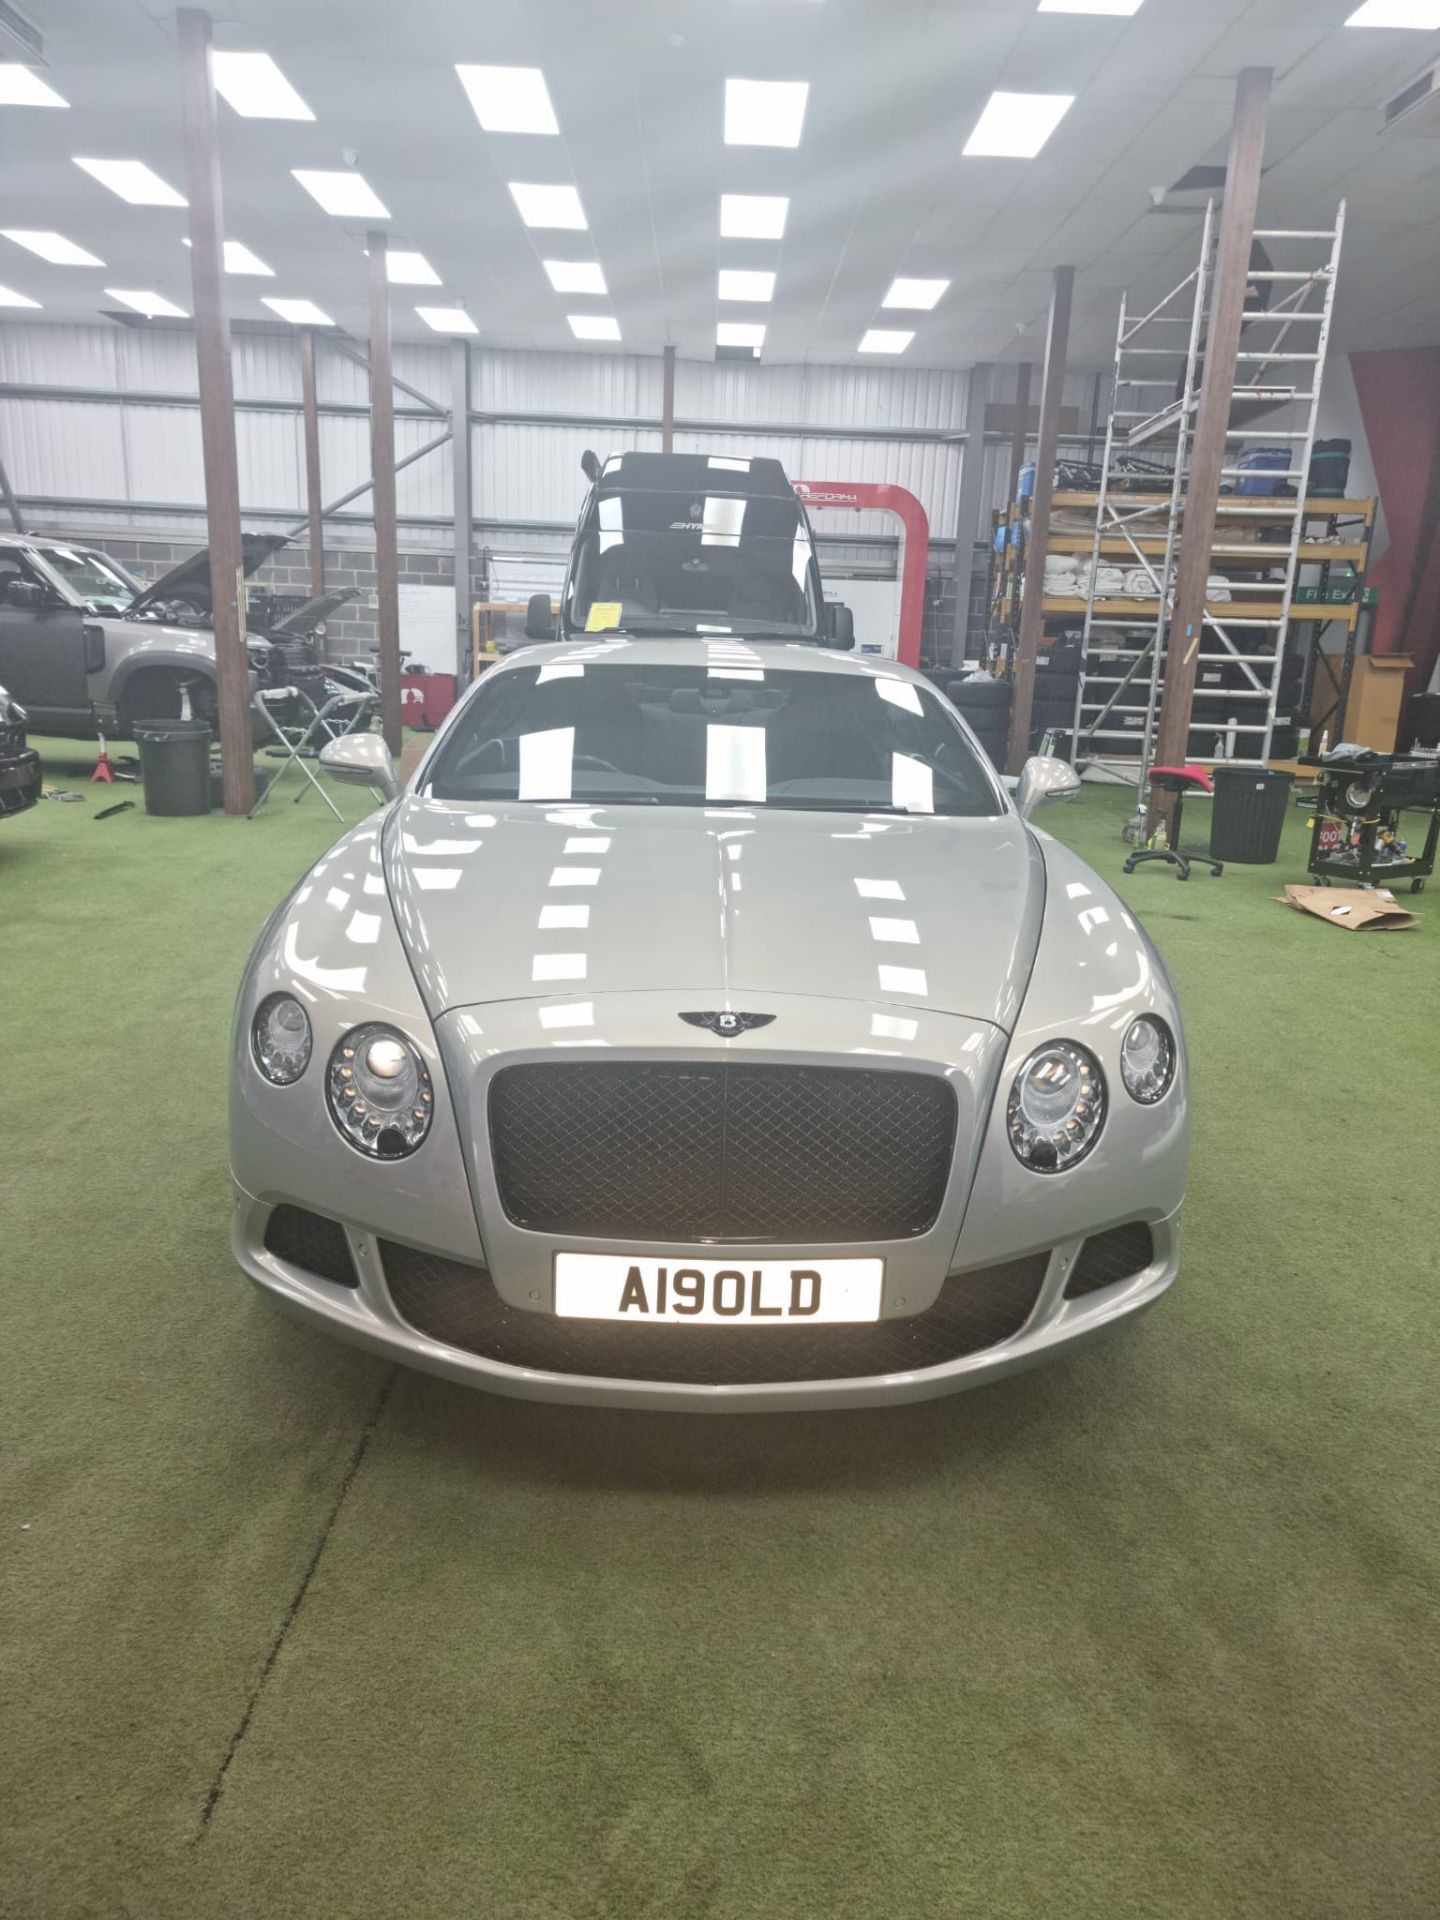 DCL - 2013 BENTLEY CONTINENTAL GT SPEED AUTO GREY COUPE, 56k miles, 626 BHP, 5998 cc PETROL - Image 5 of 16